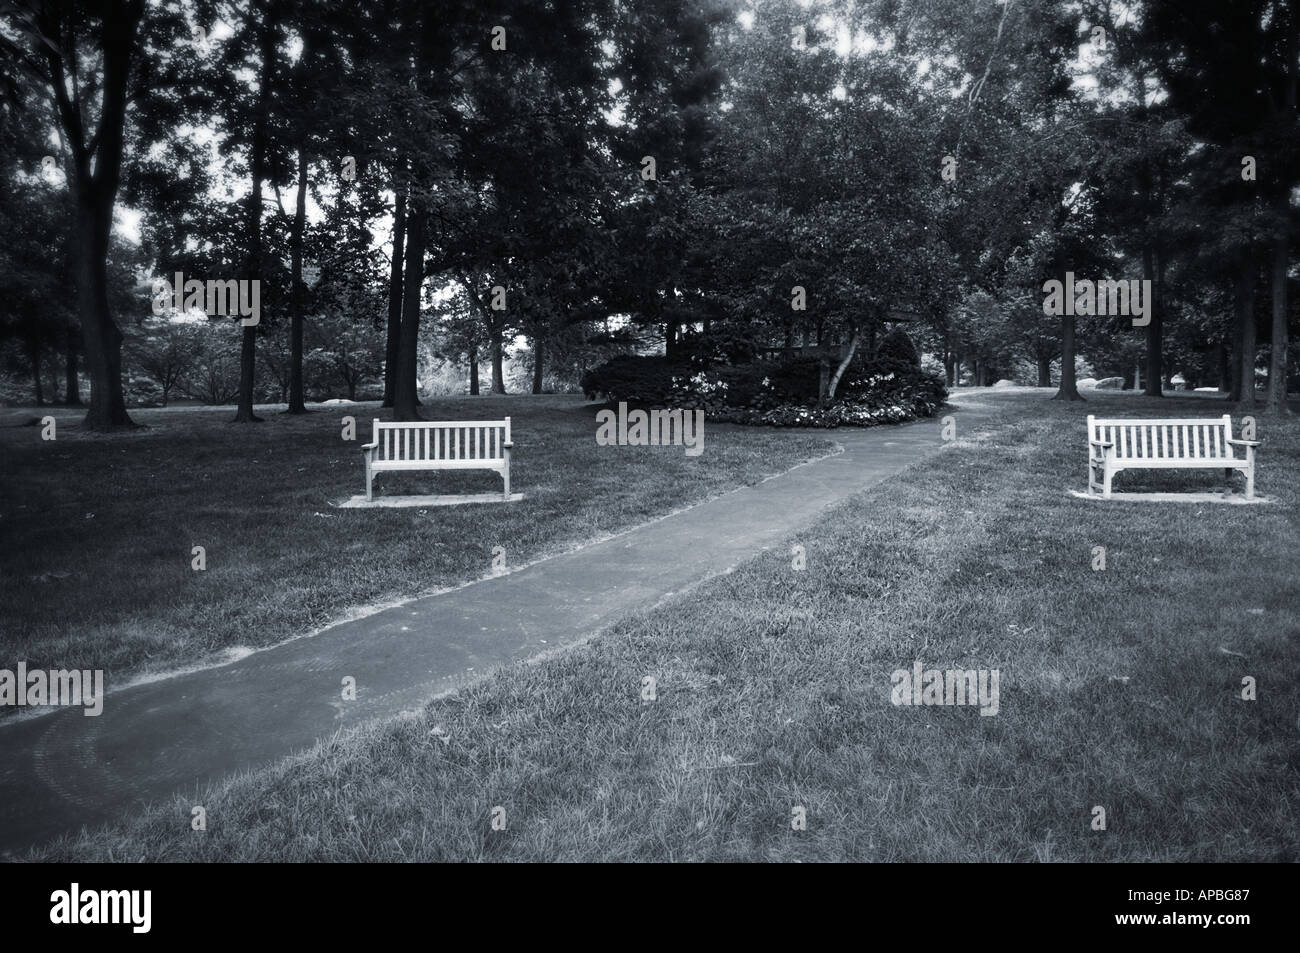 Dreamy black and white horizontal image of two park benches in a grassy wooded park with a paved path going diagonally between Stock Photo